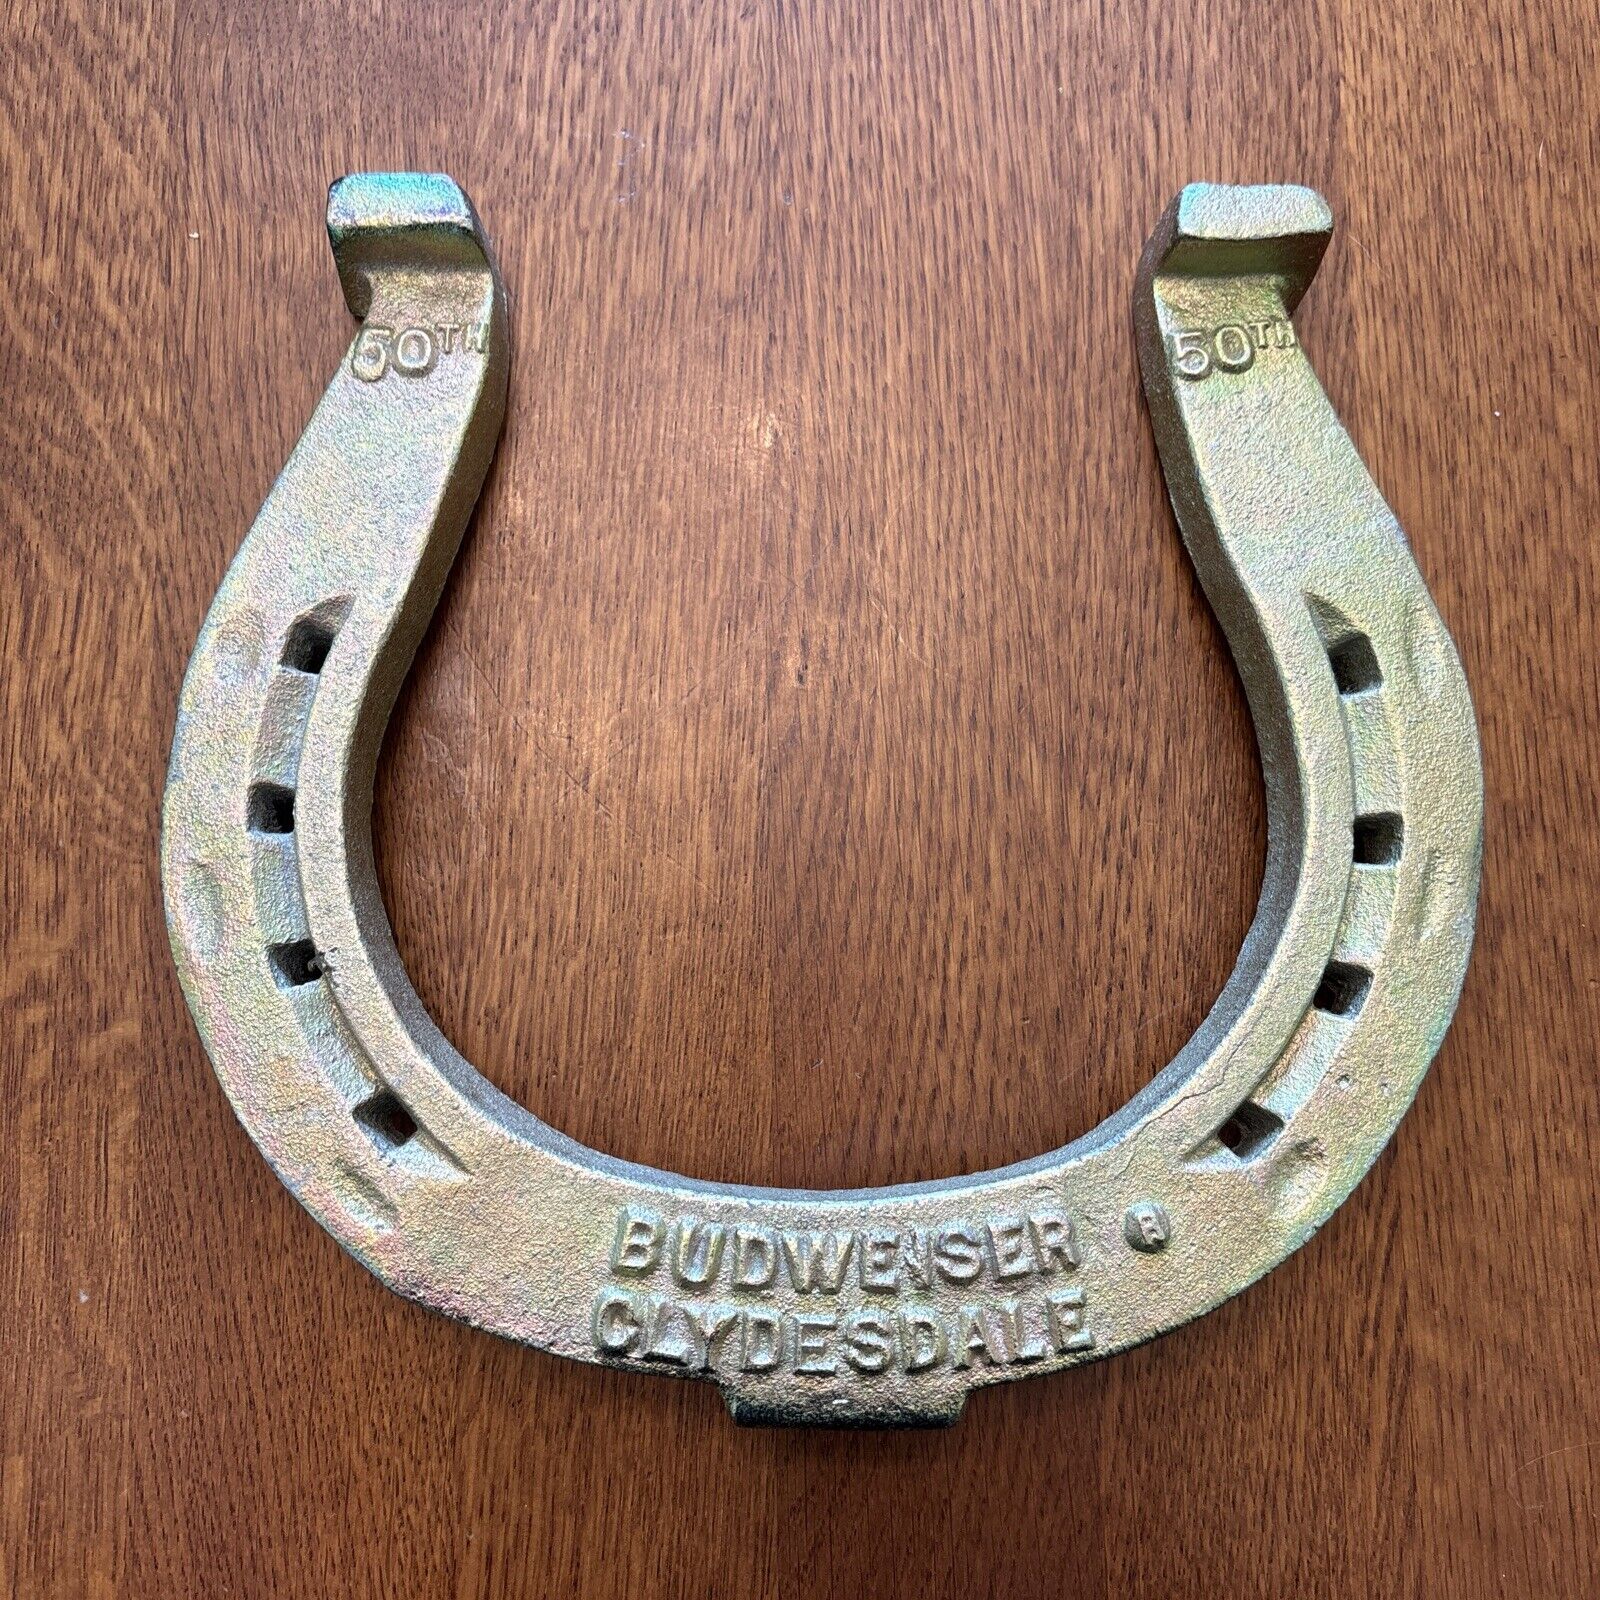 1983 Budweiser Clydesdale 50th Anniversary Large Gold Horseshoe 9”